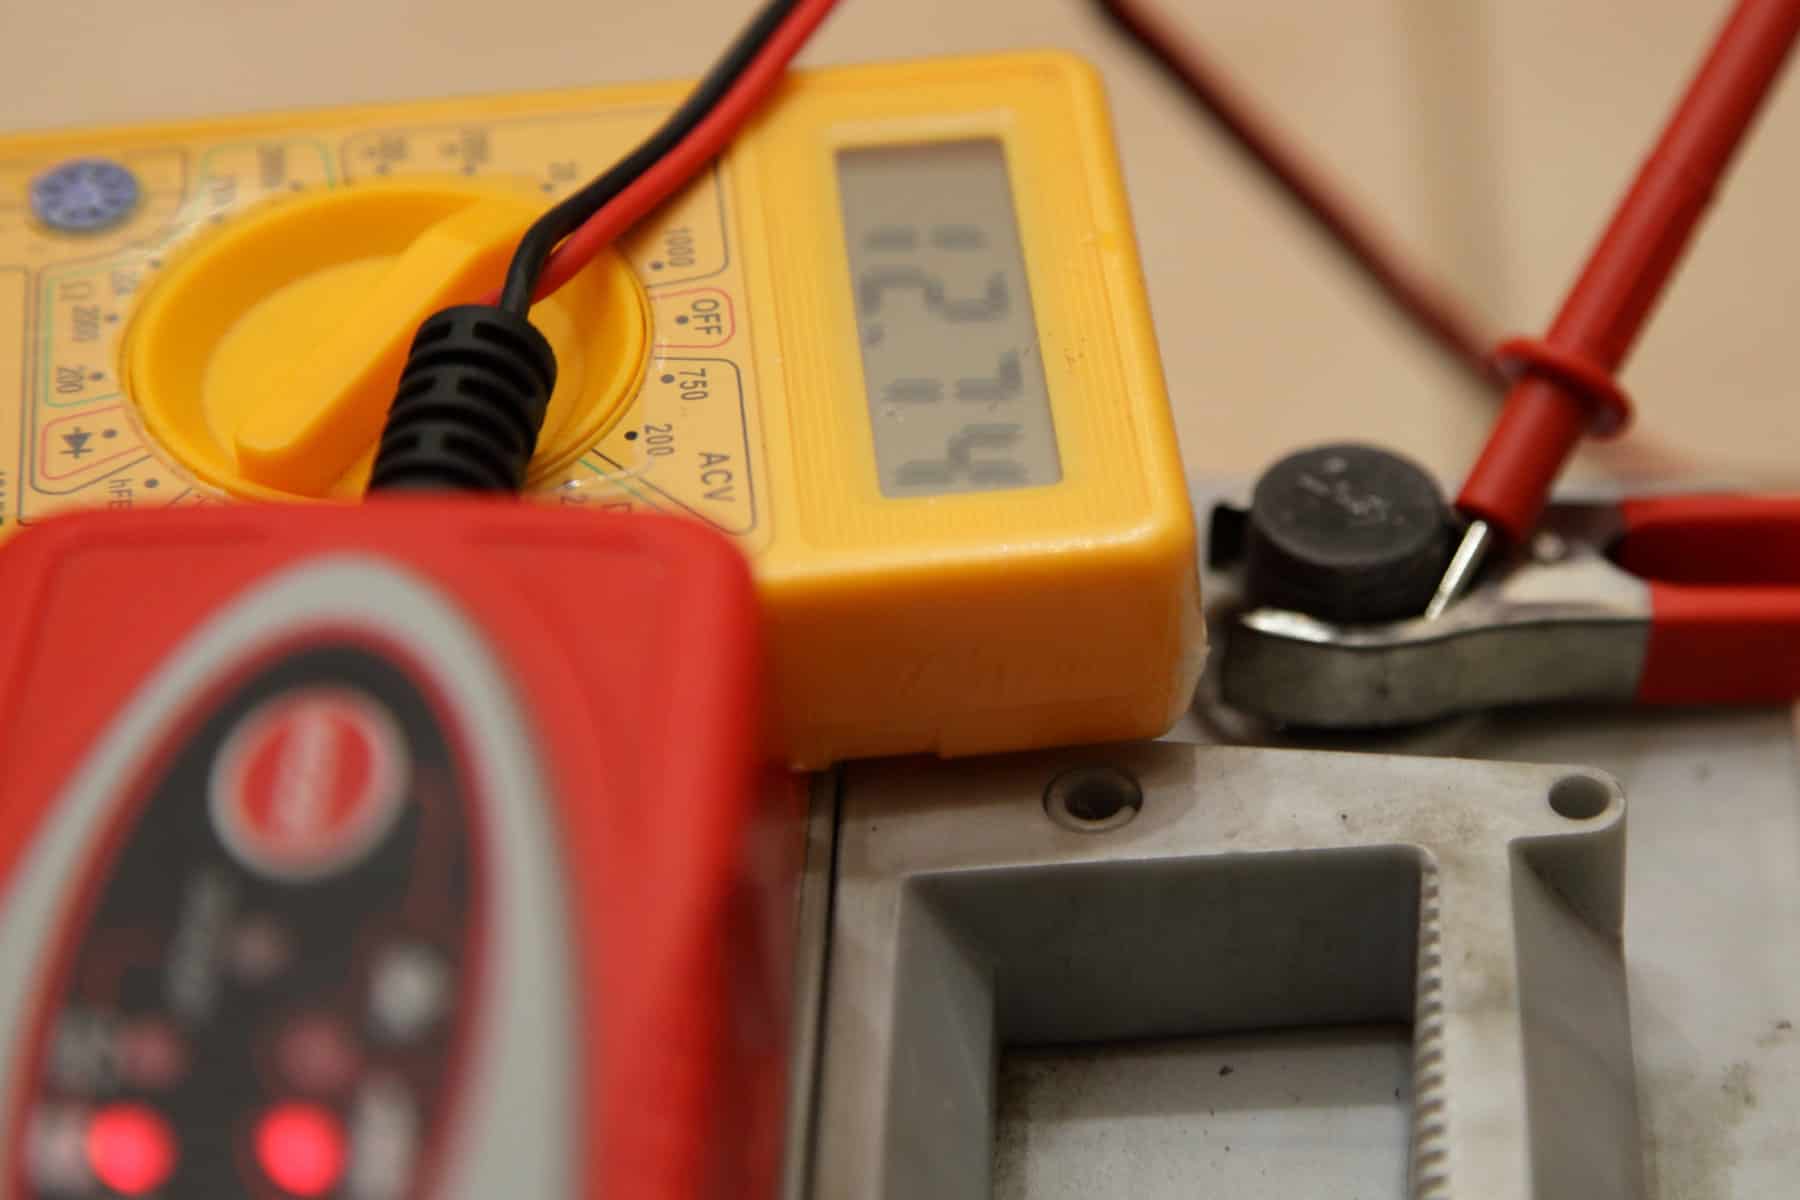 tools to troubleshoot 12-volt DC RV power problems